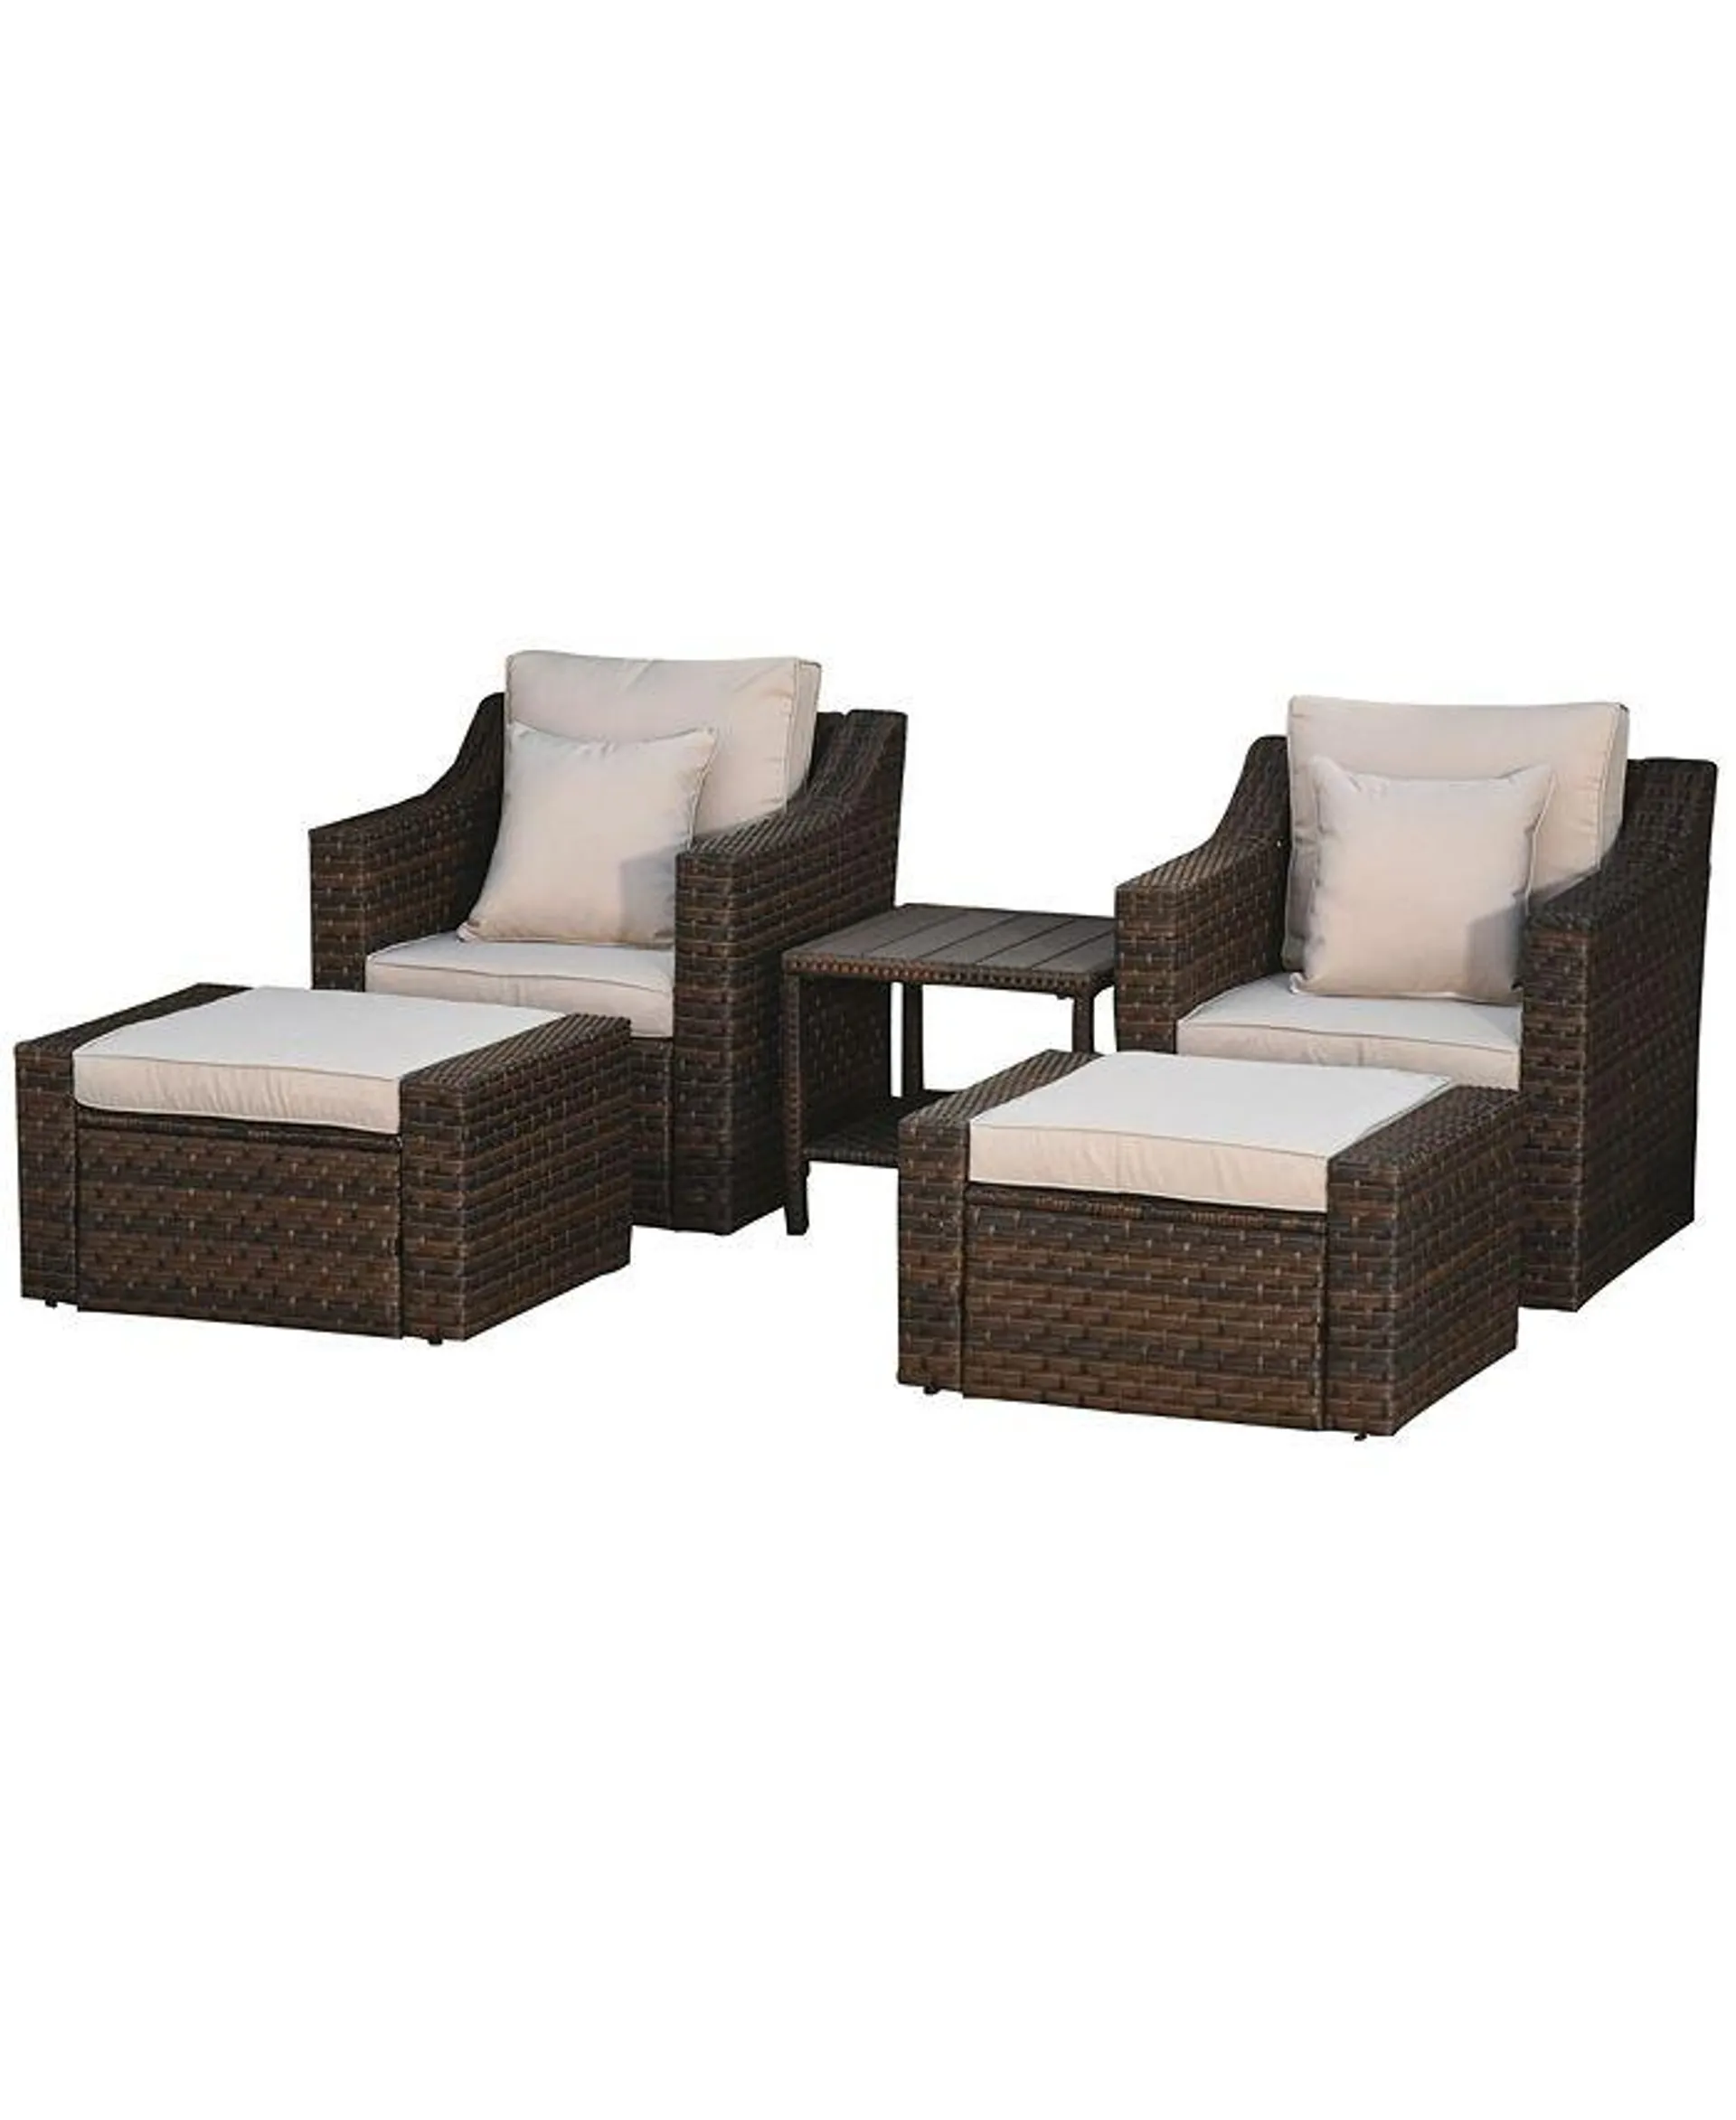 5-Piece PE Rattan Outdoor Patio Armchair Set with 2 Chairs, 2 Ottomans, Coffee Table Conversation Set, & Durable Build, Beige